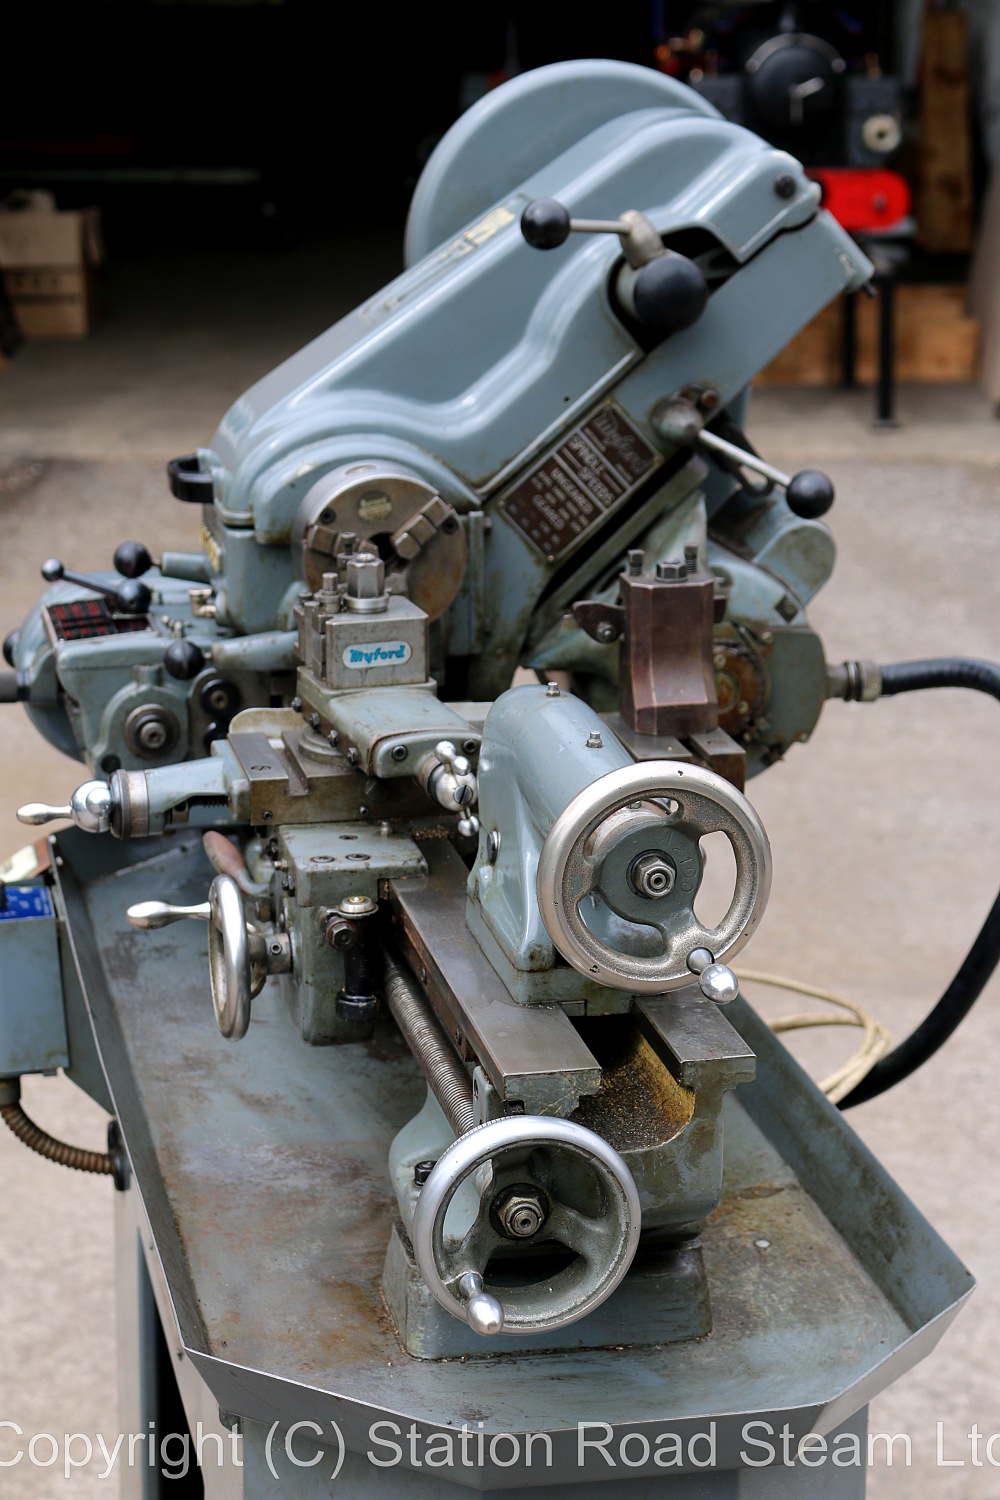 Myford Super 7B lathe on cabinet stand